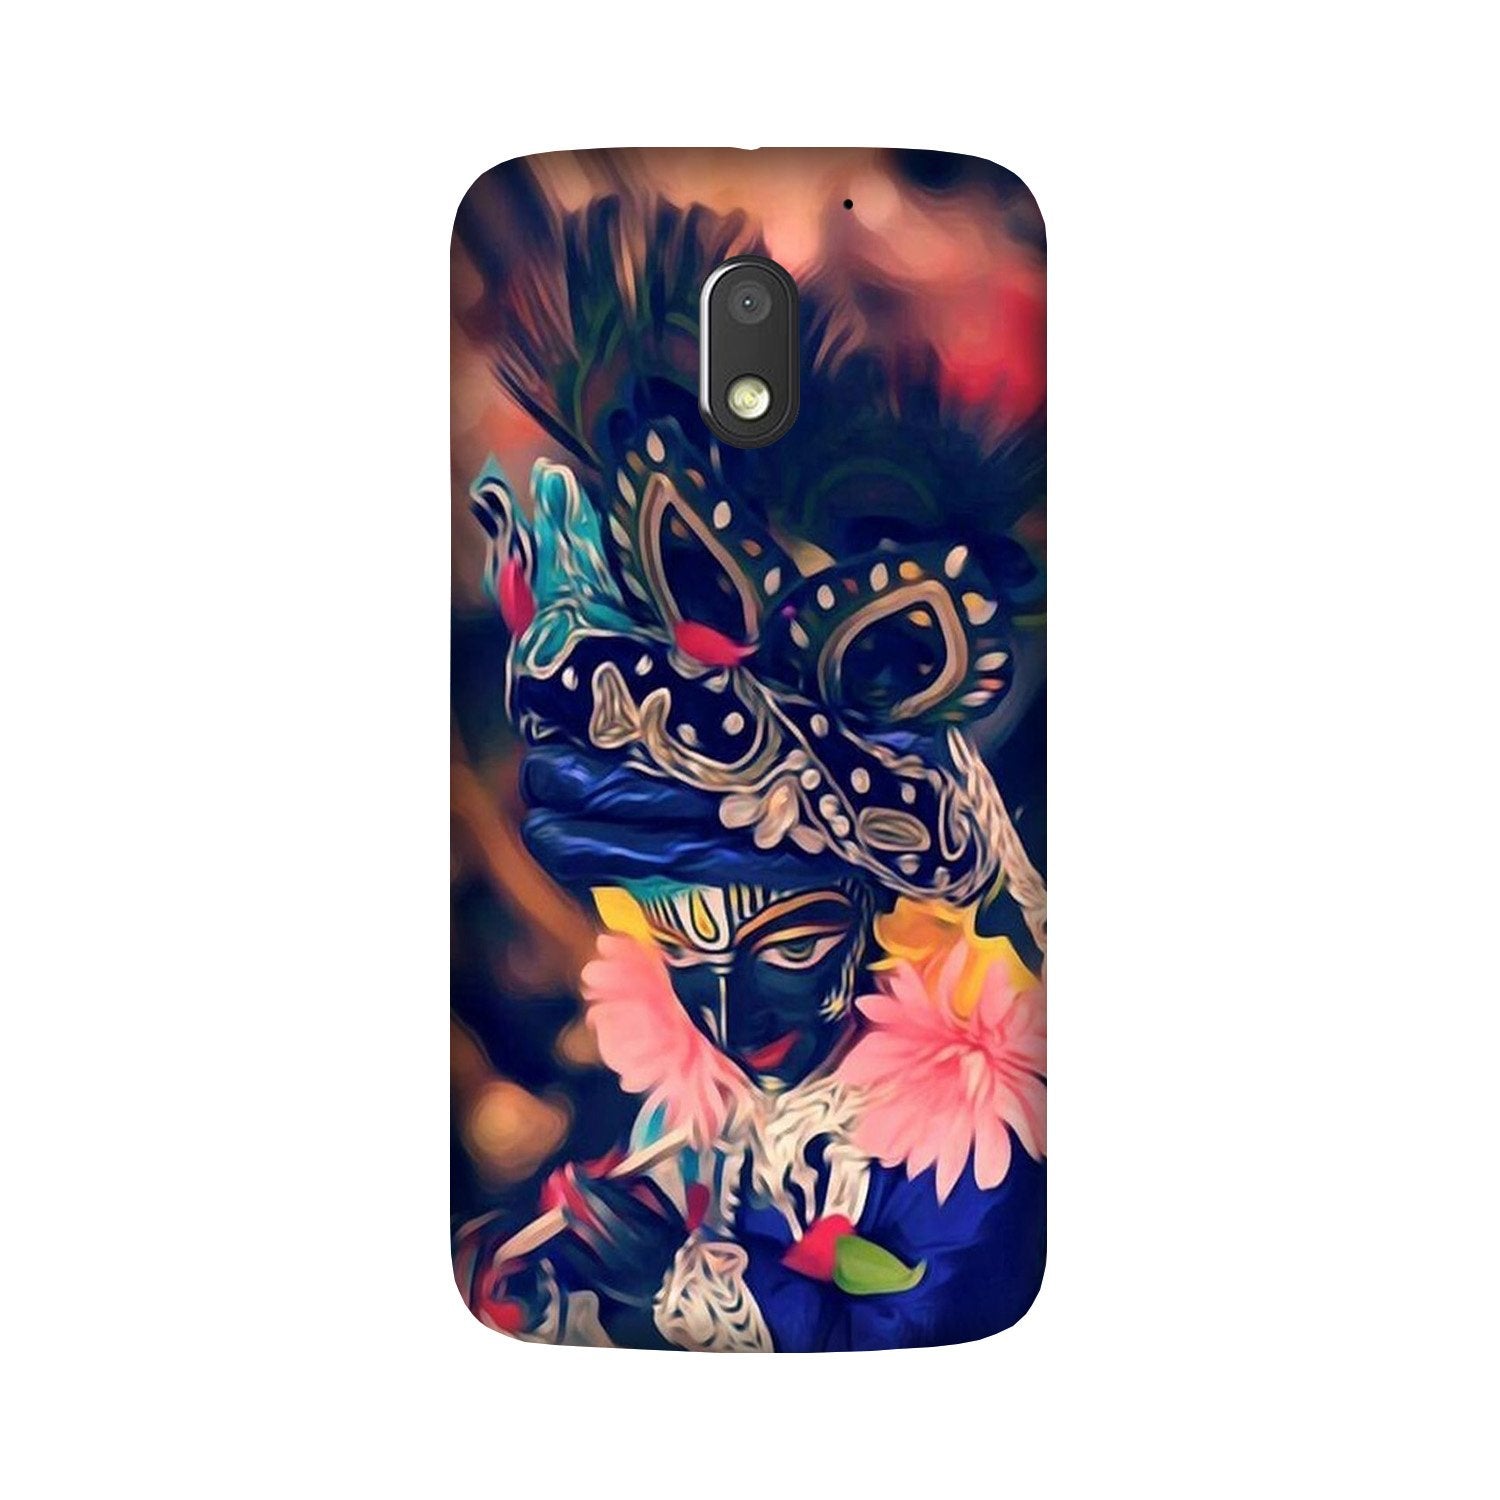 Lord Krishna Case for Moto G4 Play